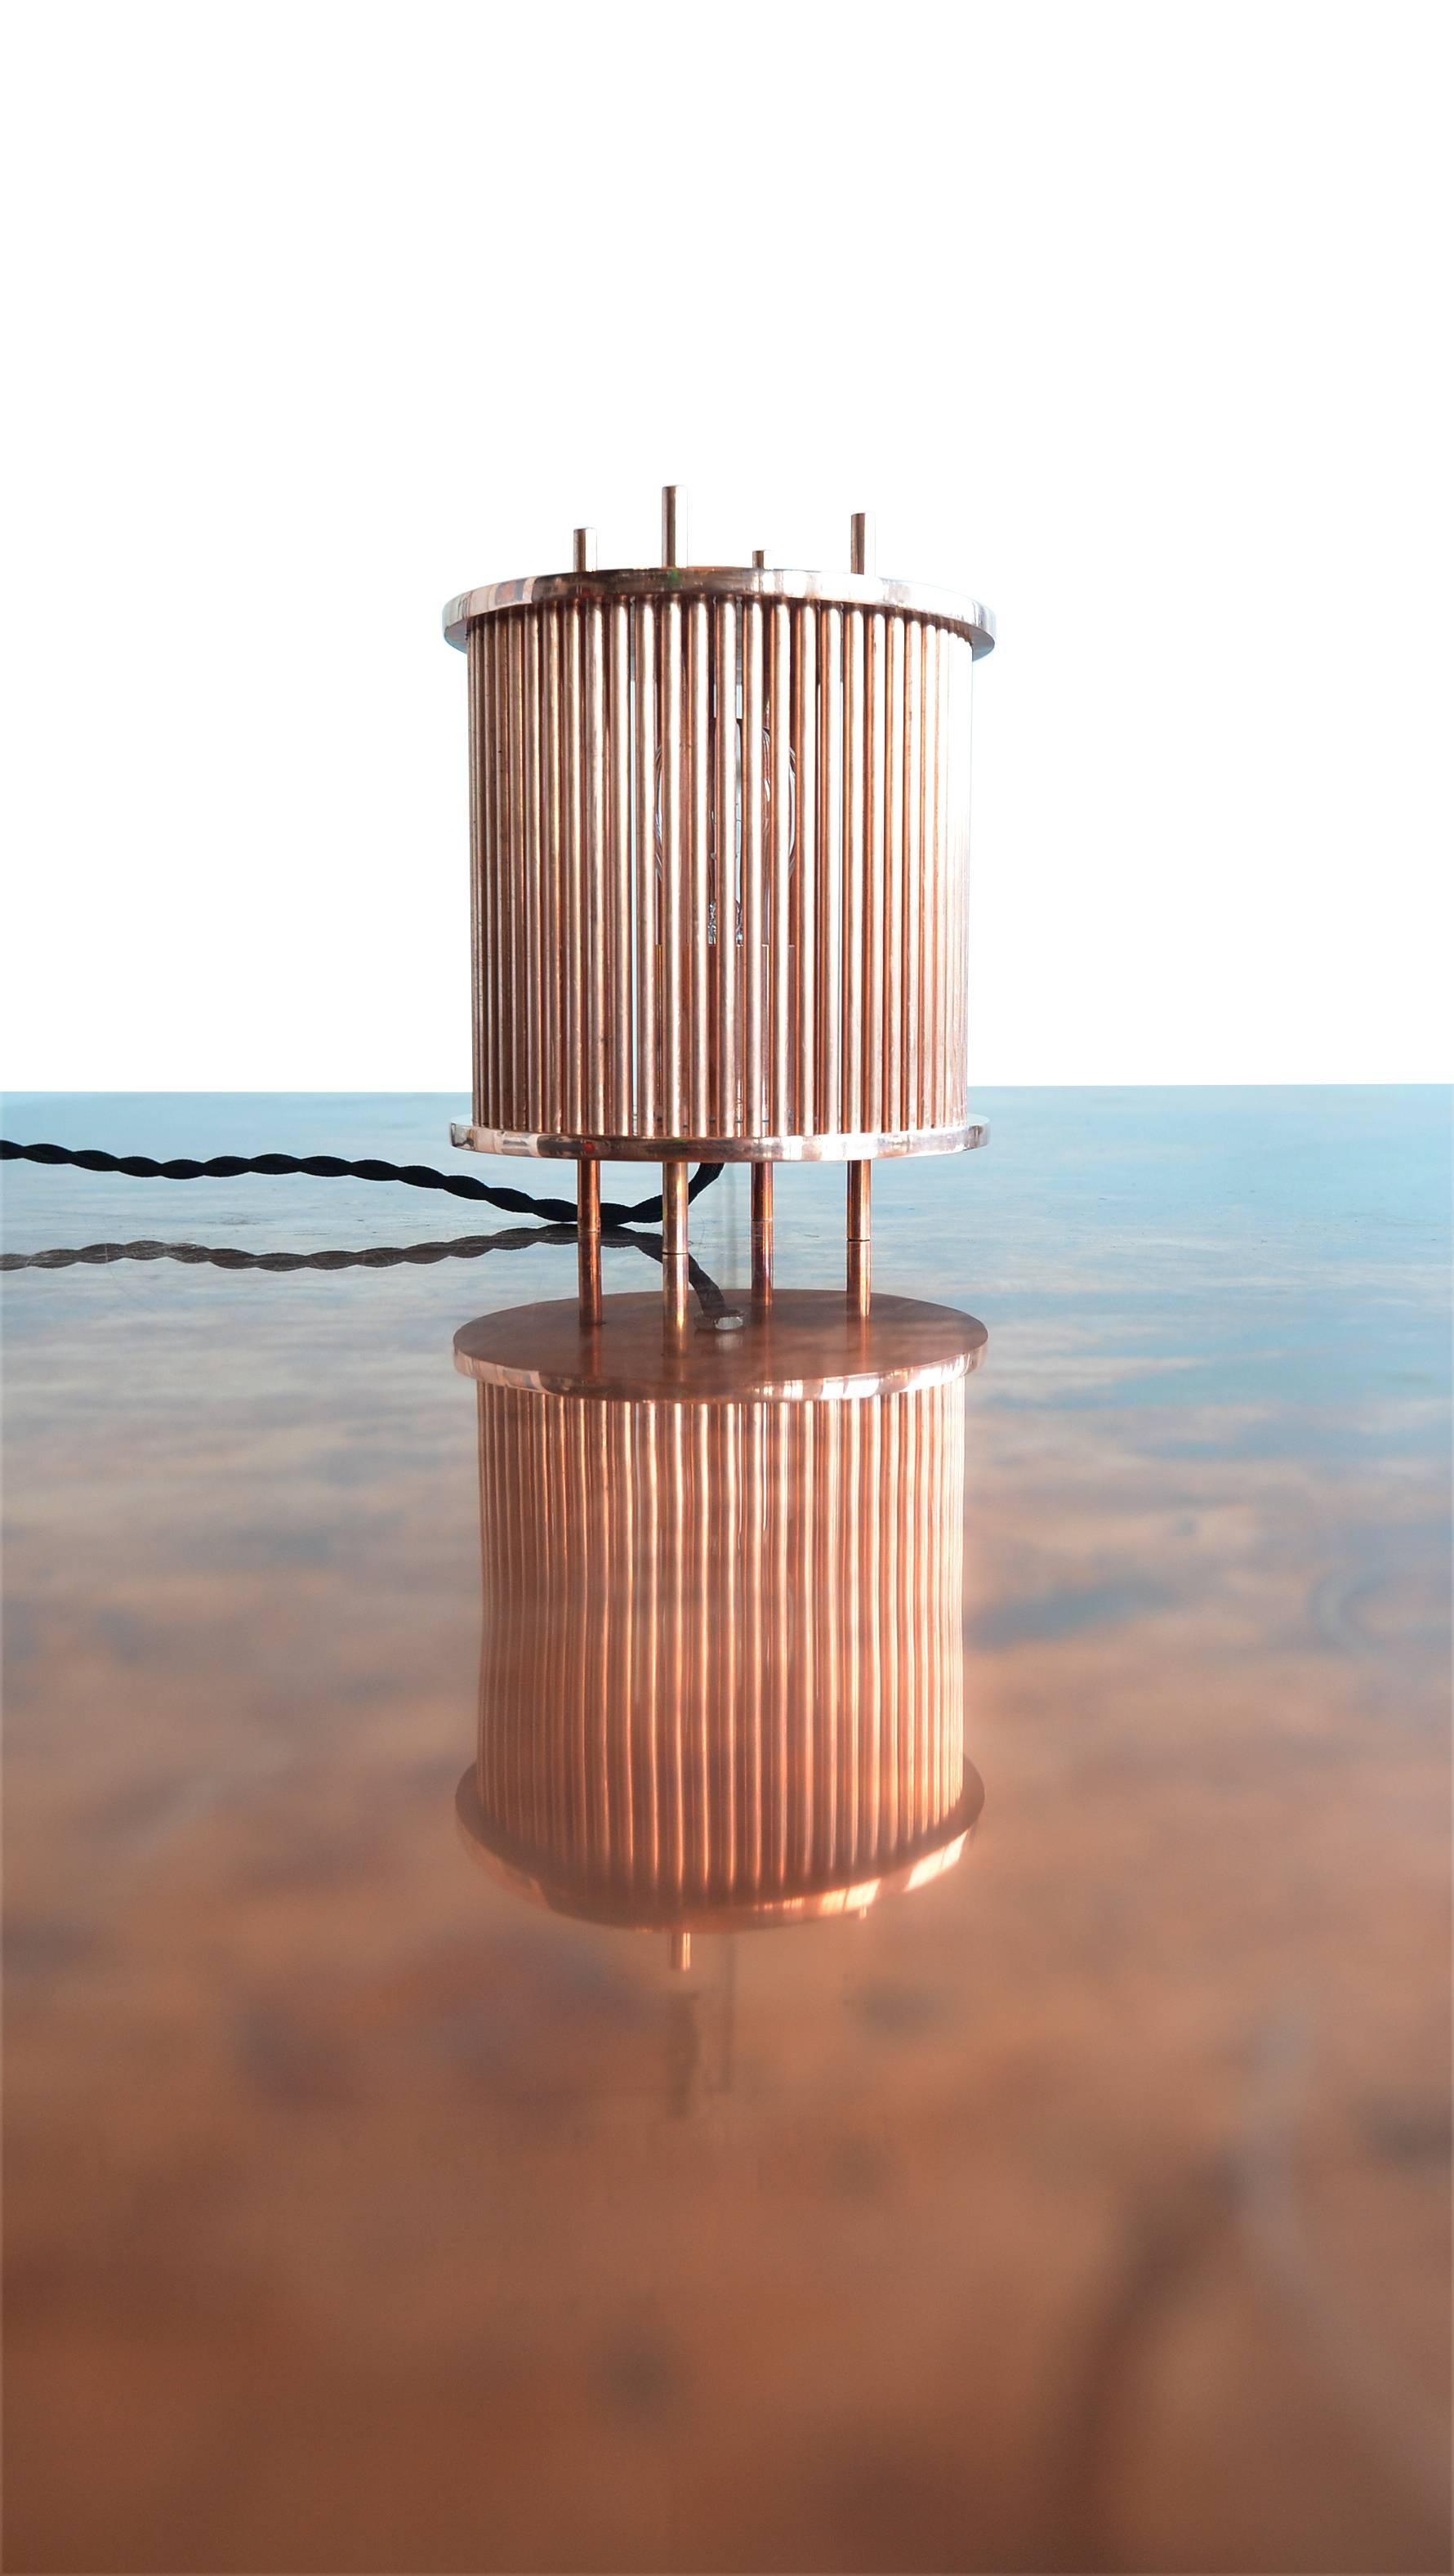 An incredible, bright solid copper table lamp by Porch Modern. 

These lamps are created from solid plate copper and rod. Milled inset holes holding 63 individual solid copper rods. 
Lit with a single raw build which produces incredible shadows